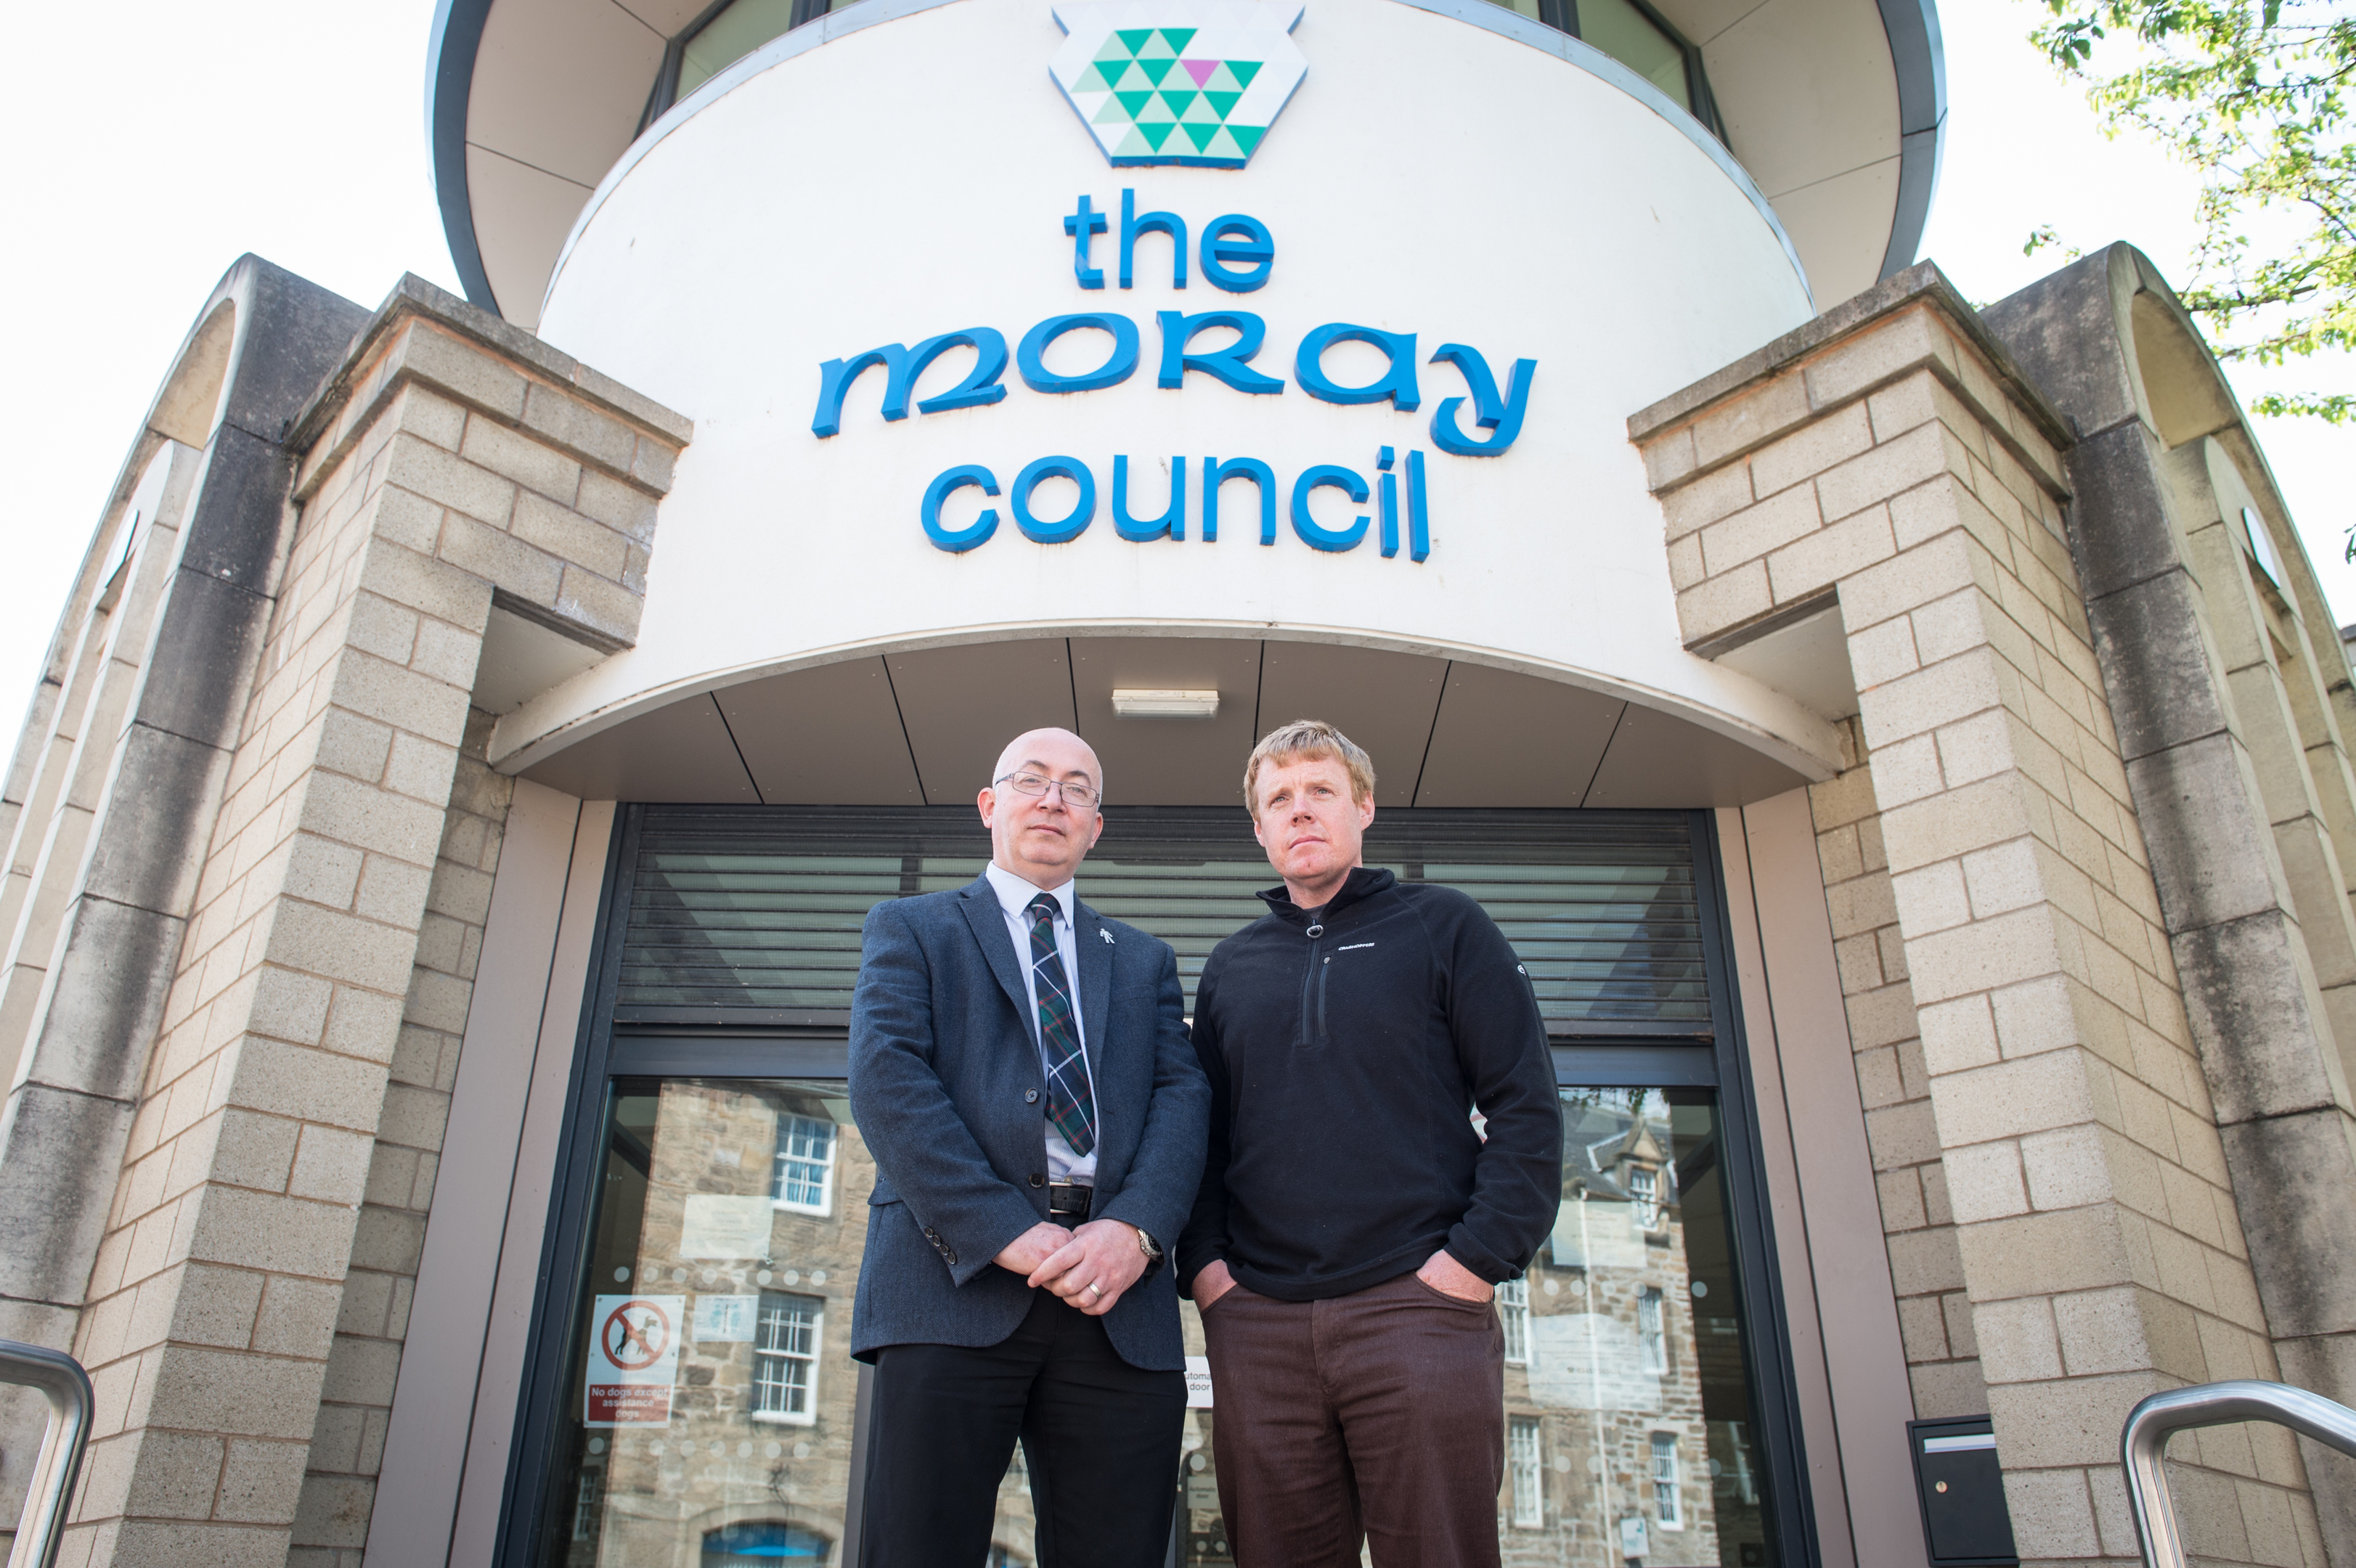 Conservative councillors Marc Macrae and Tim Eagle have threatened to quit the council's administration.